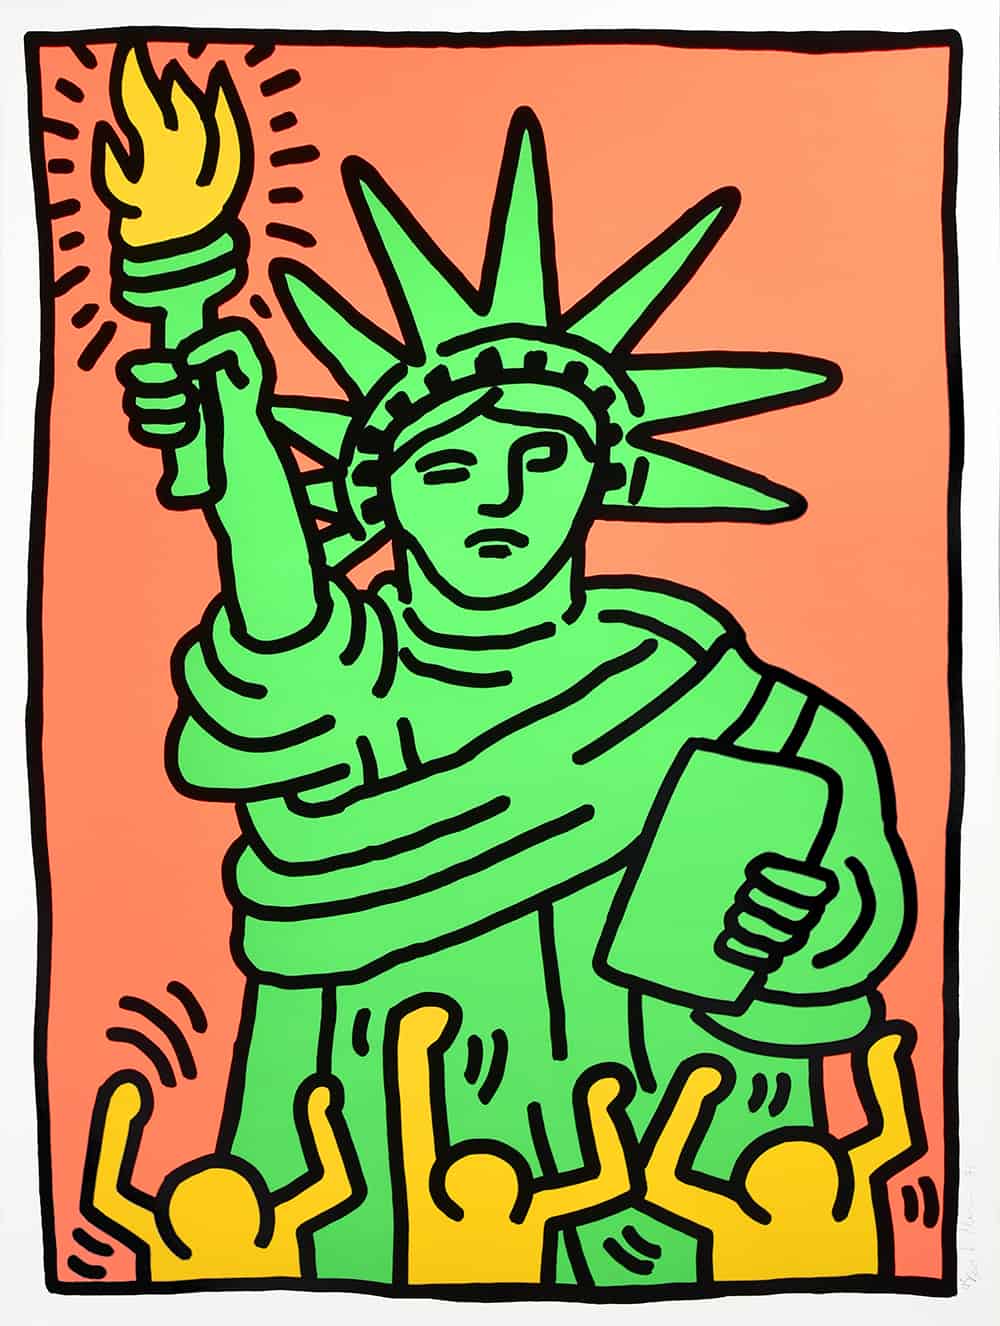 https://images.masterworksfineart.com/product/statue-of-liberty-1986-2/keith-haring-screenprint-statue-of-liberty-1986-for-sale-ours.jpg